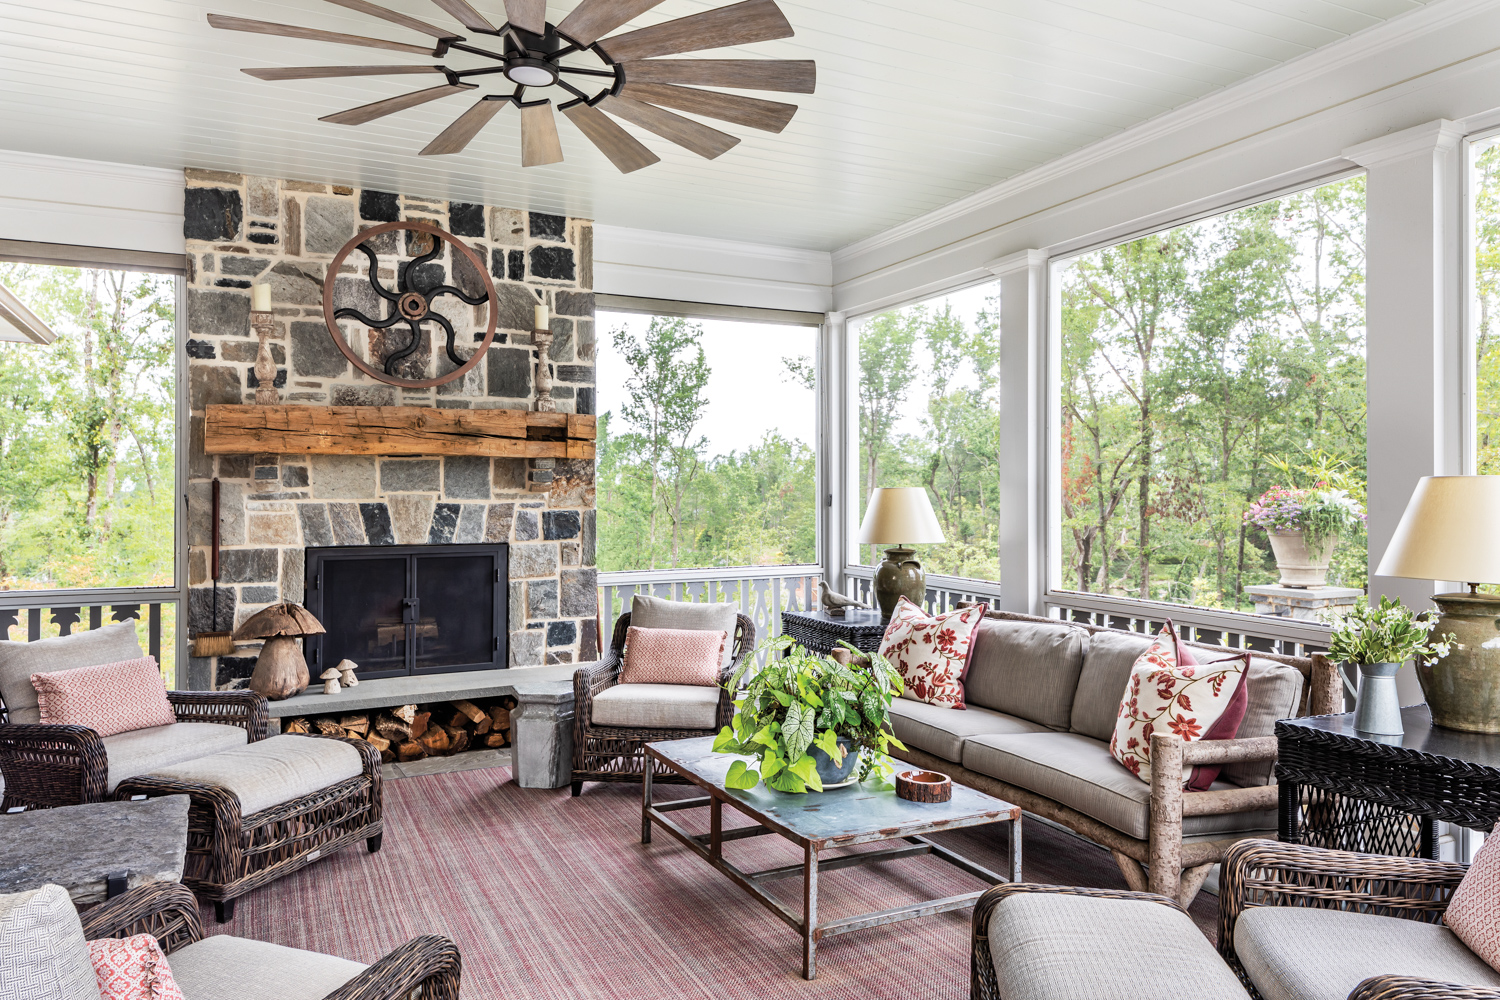 Outdoor screened porch with rustic fan, red rug and rugged stone fireplace